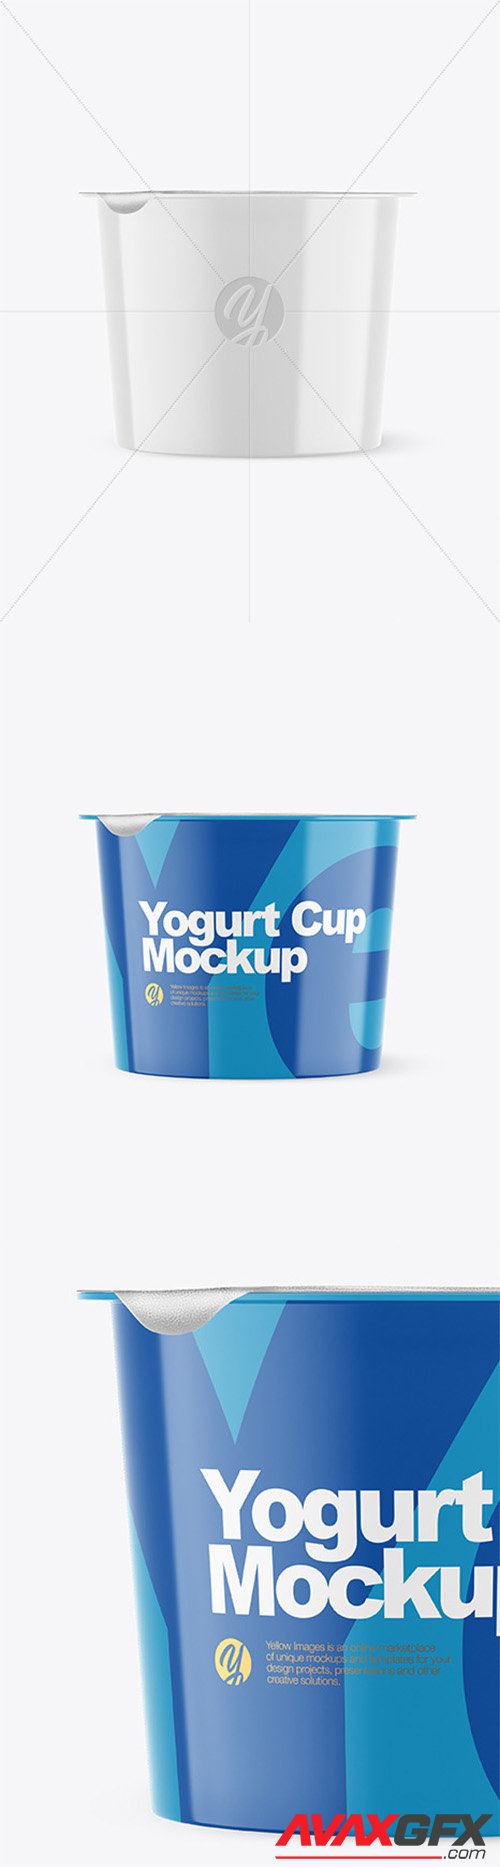 Glossy Plastic Yogurt Cup With Foil Lid Mockup - Front View 66253